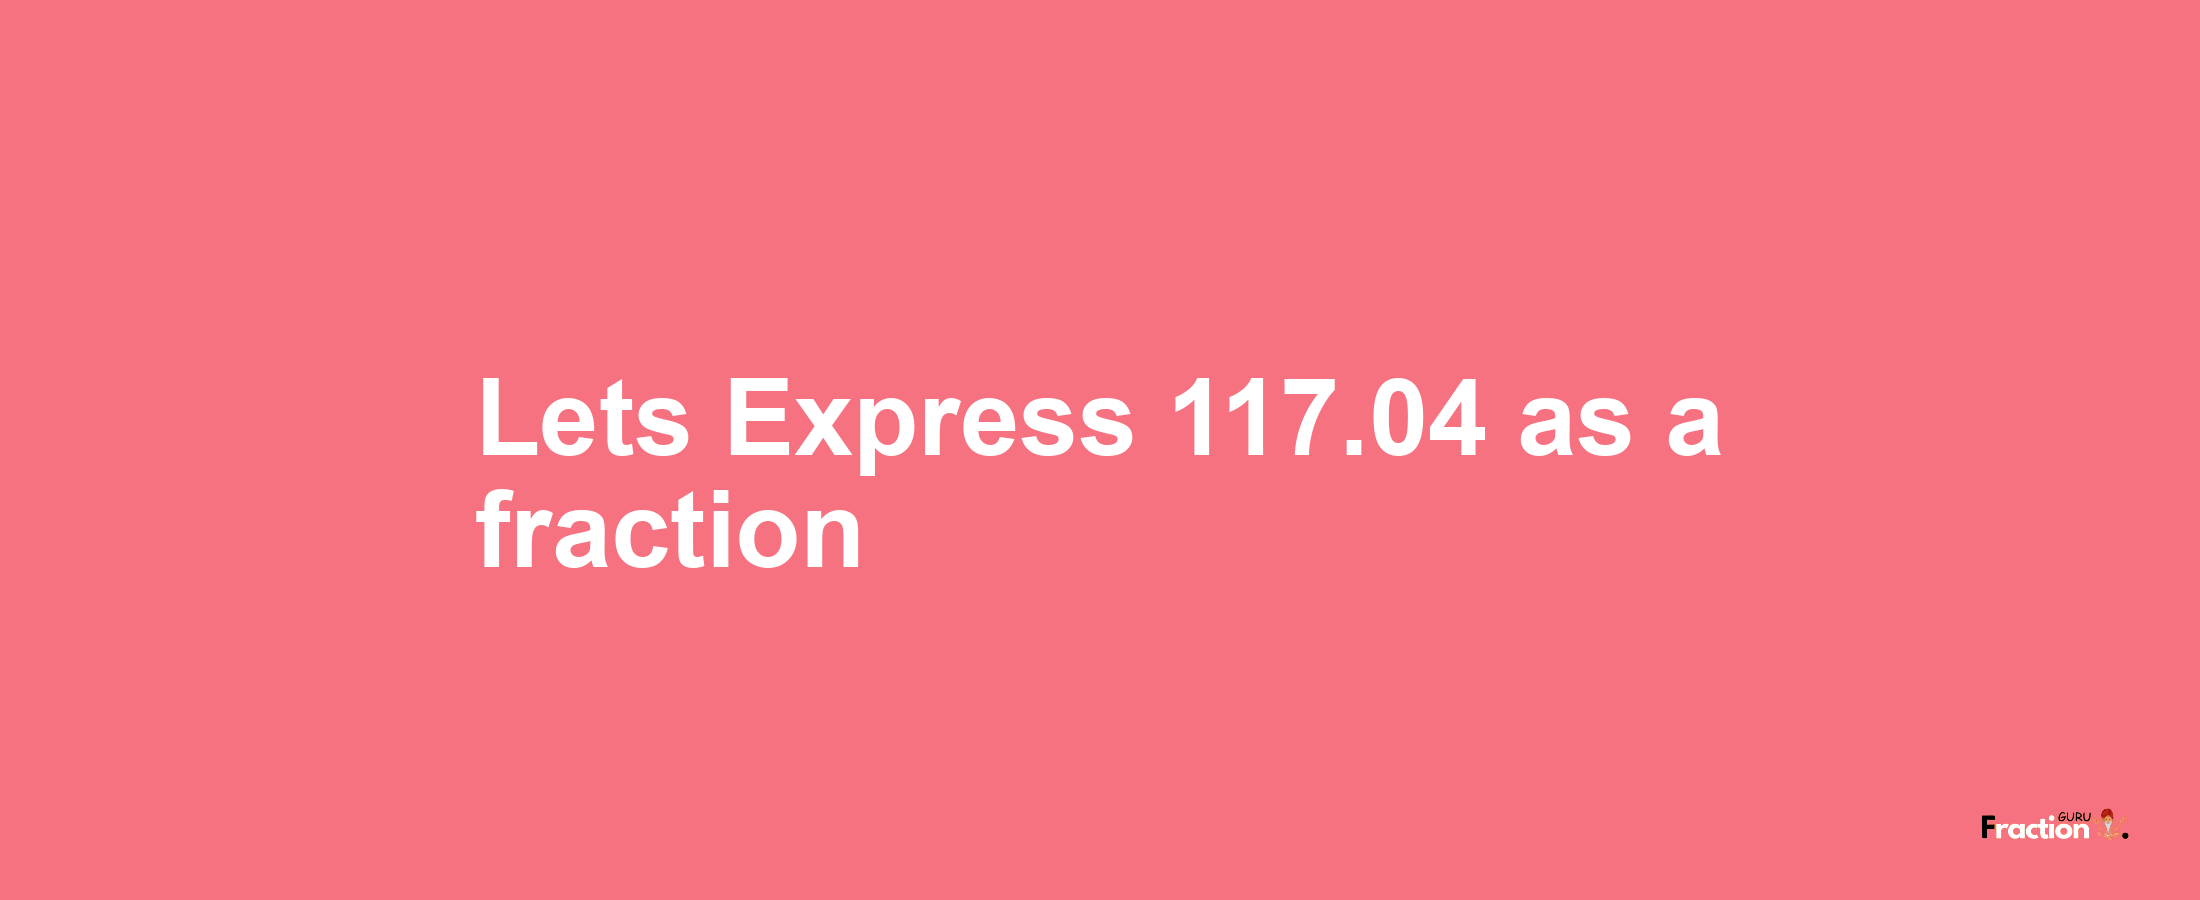 Lets Express 117.04 as afraction